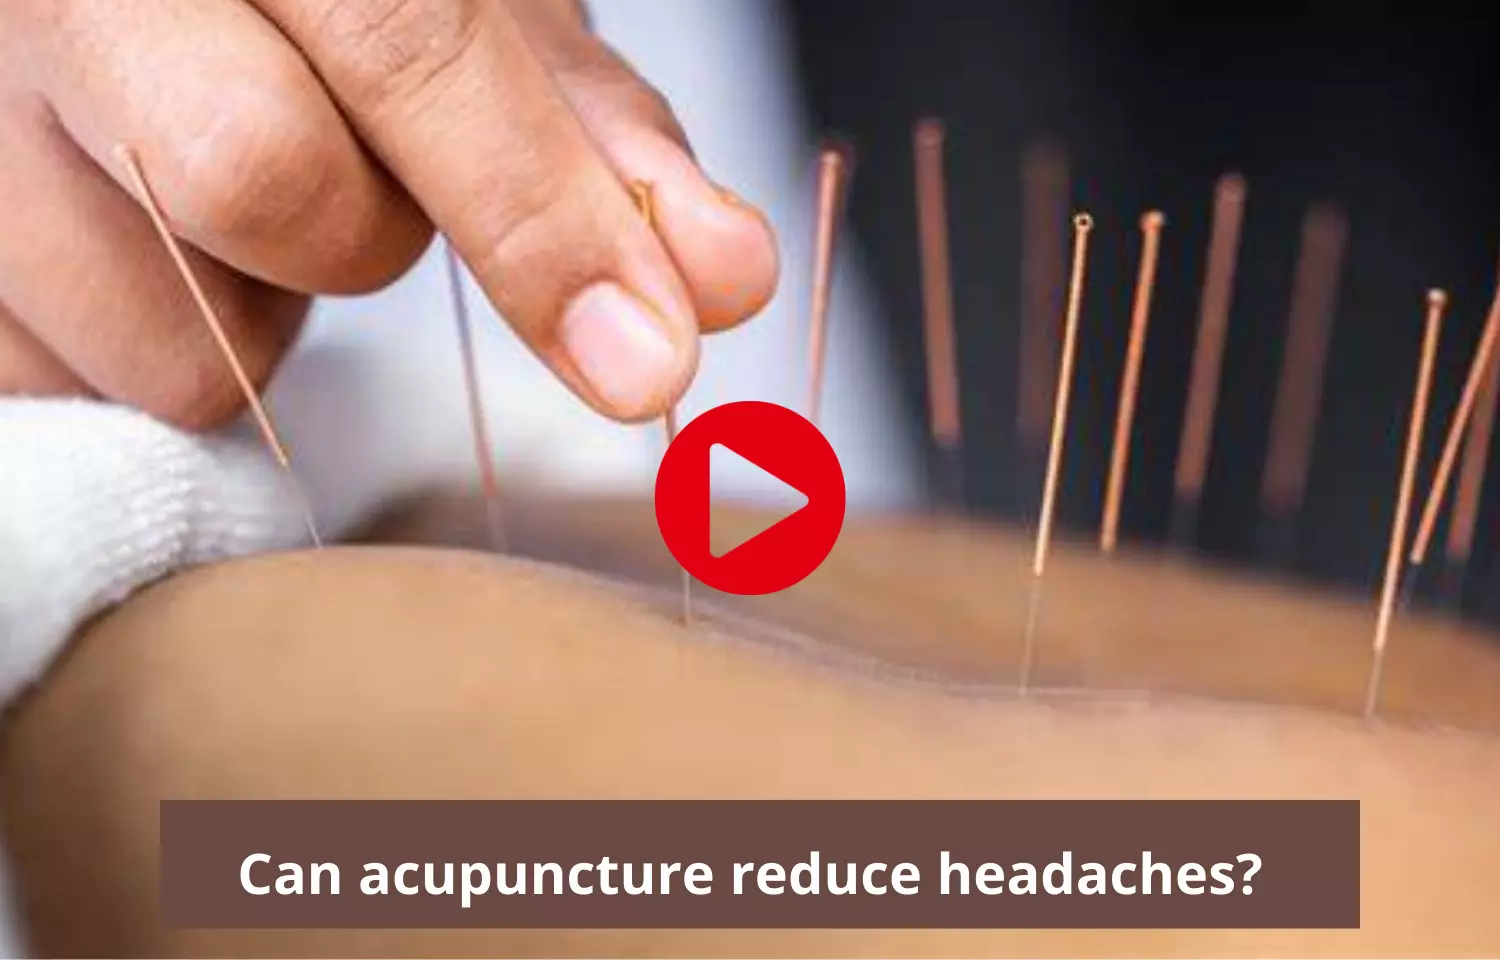 Acupuncture effective in reducing headaches?